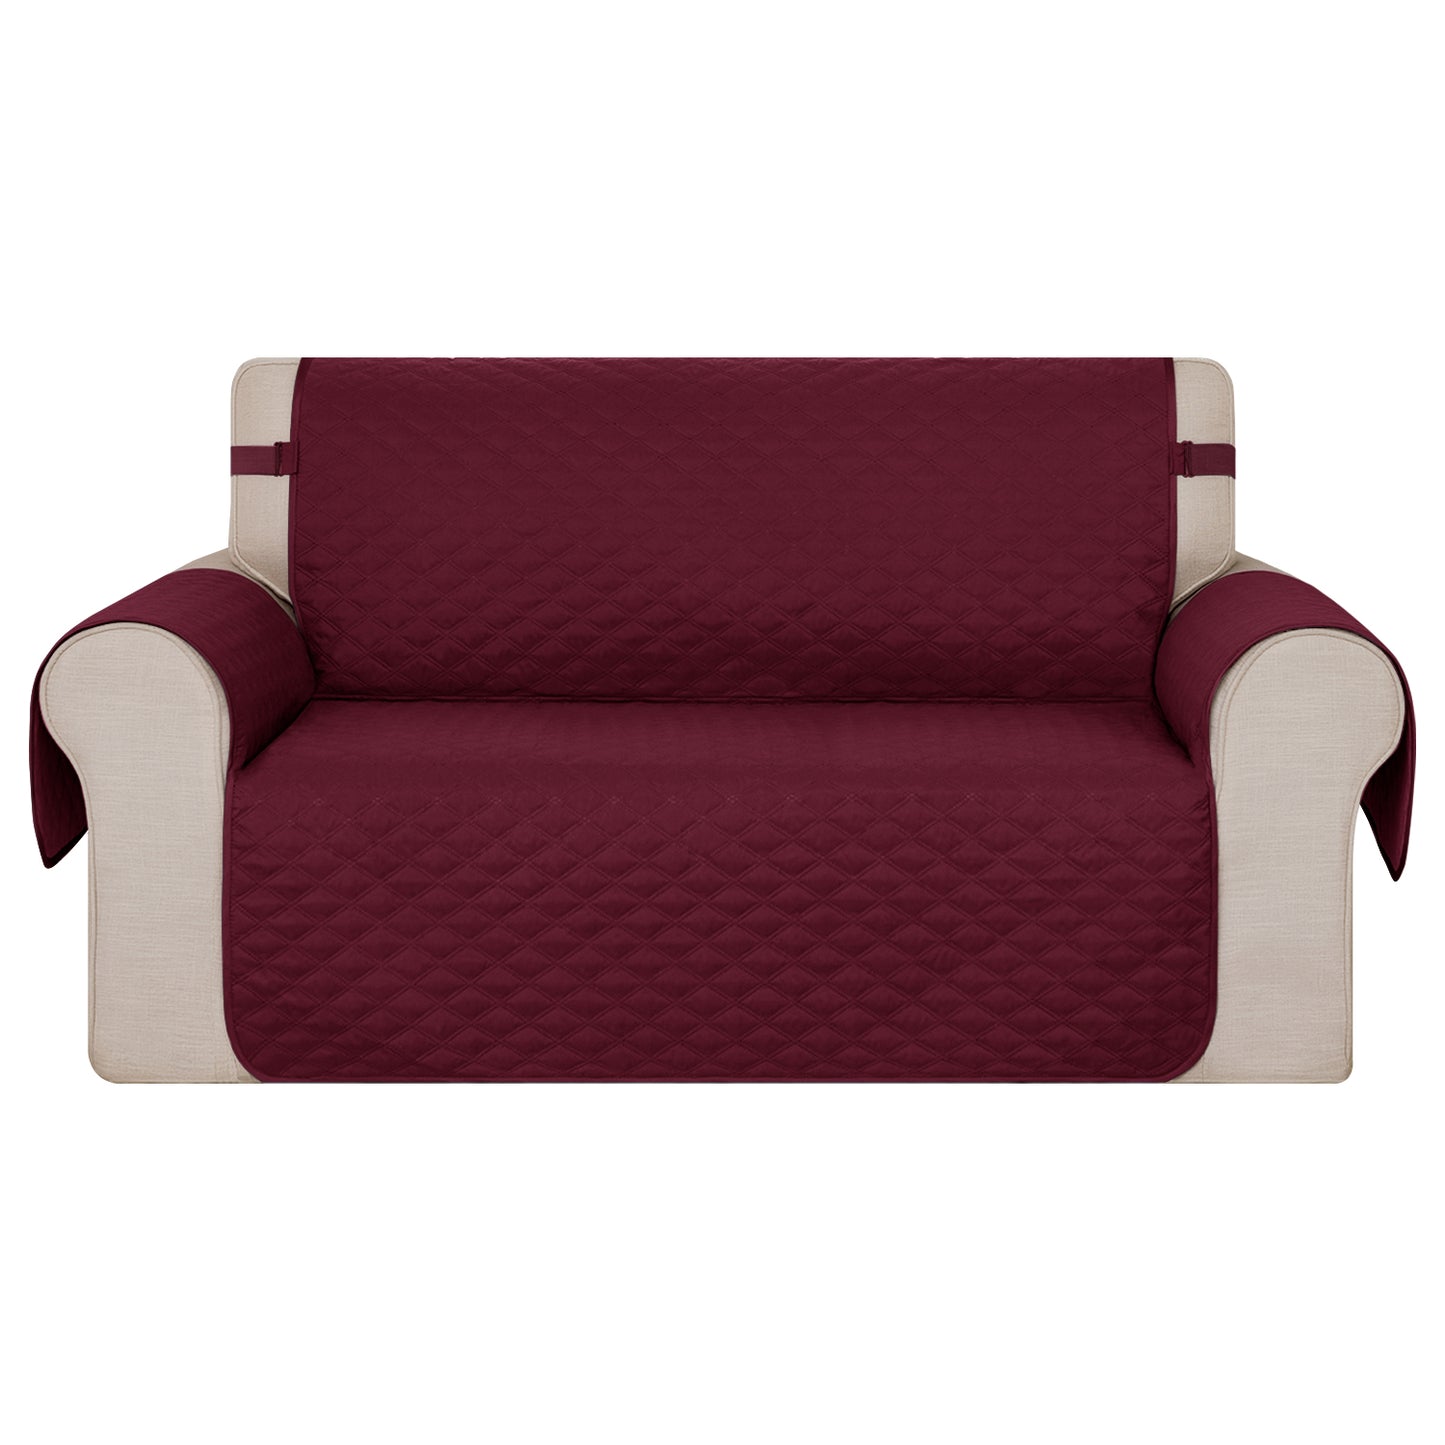 WYNTEX Microfiber Cover Snowflake Quilted Armchair Slipcover Slip Resistant Improved Sofa Shield with Elastic Straps